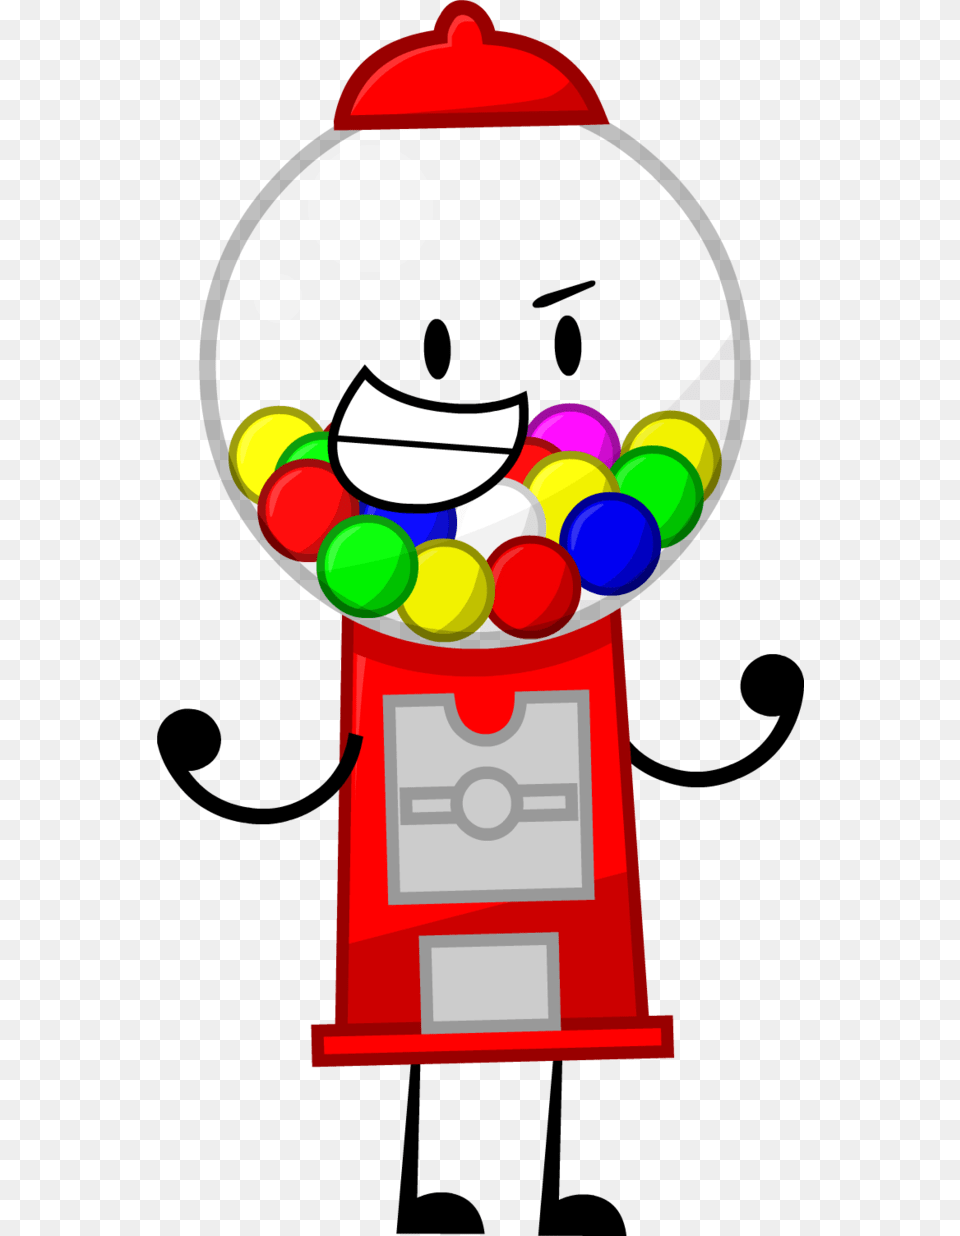 Gumball Machine By Cormacoliver11 D8vld9q Gumball Machine Bfdi, Dynamite, Weapon Png Image